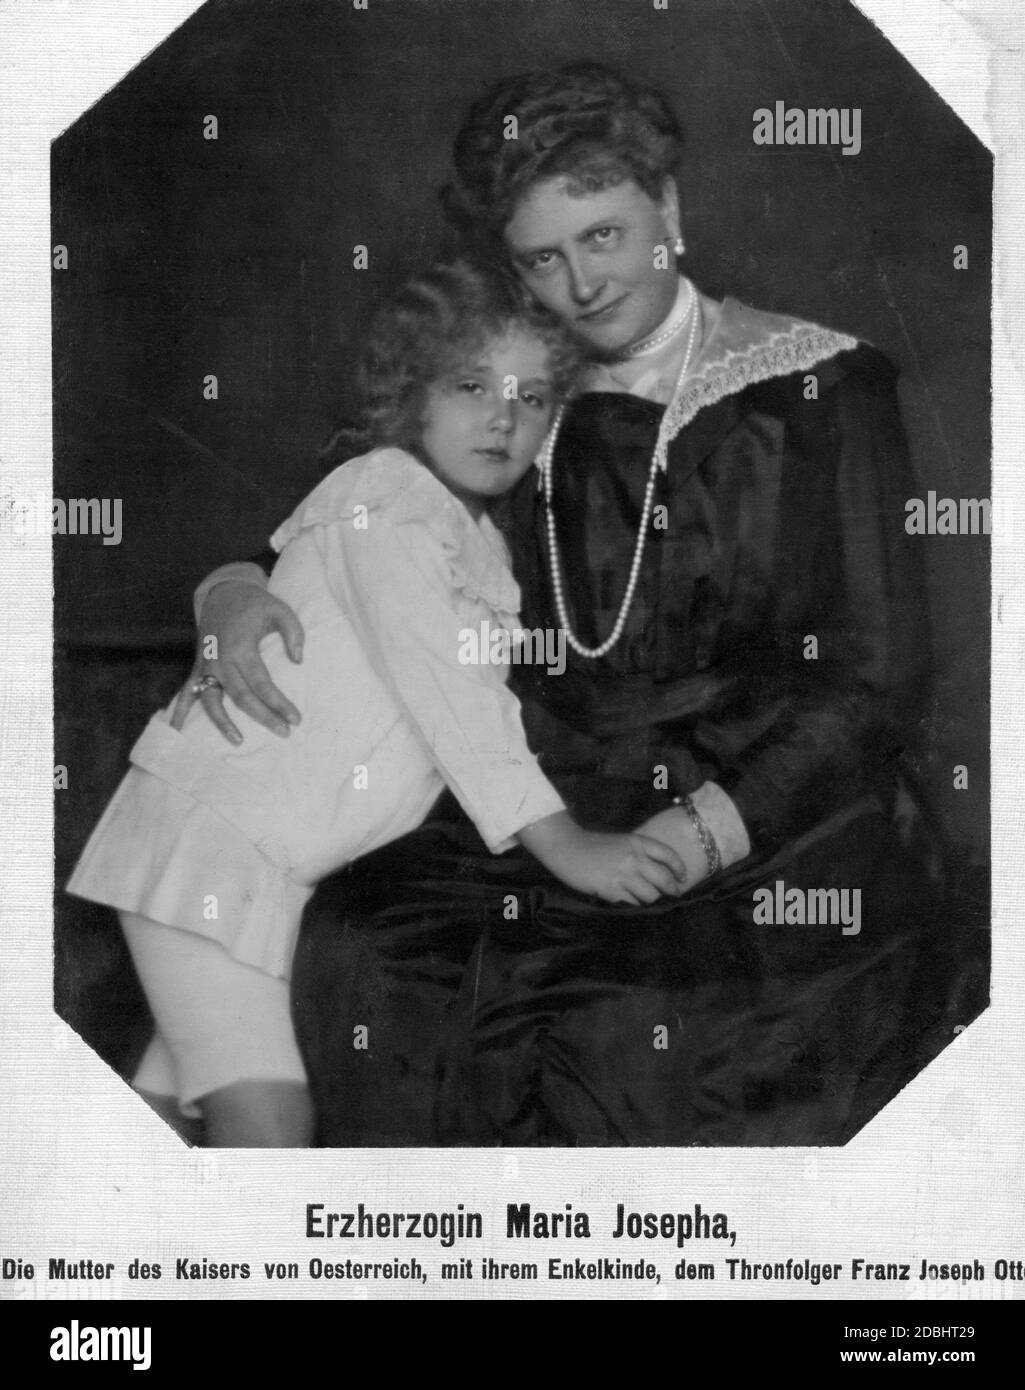 The son of the last Austrian Emperor and heir to the throne Otto von Habsburg with the mother of Emperor Karl, Maria Josepha Louise of Saxony. Stock Photo